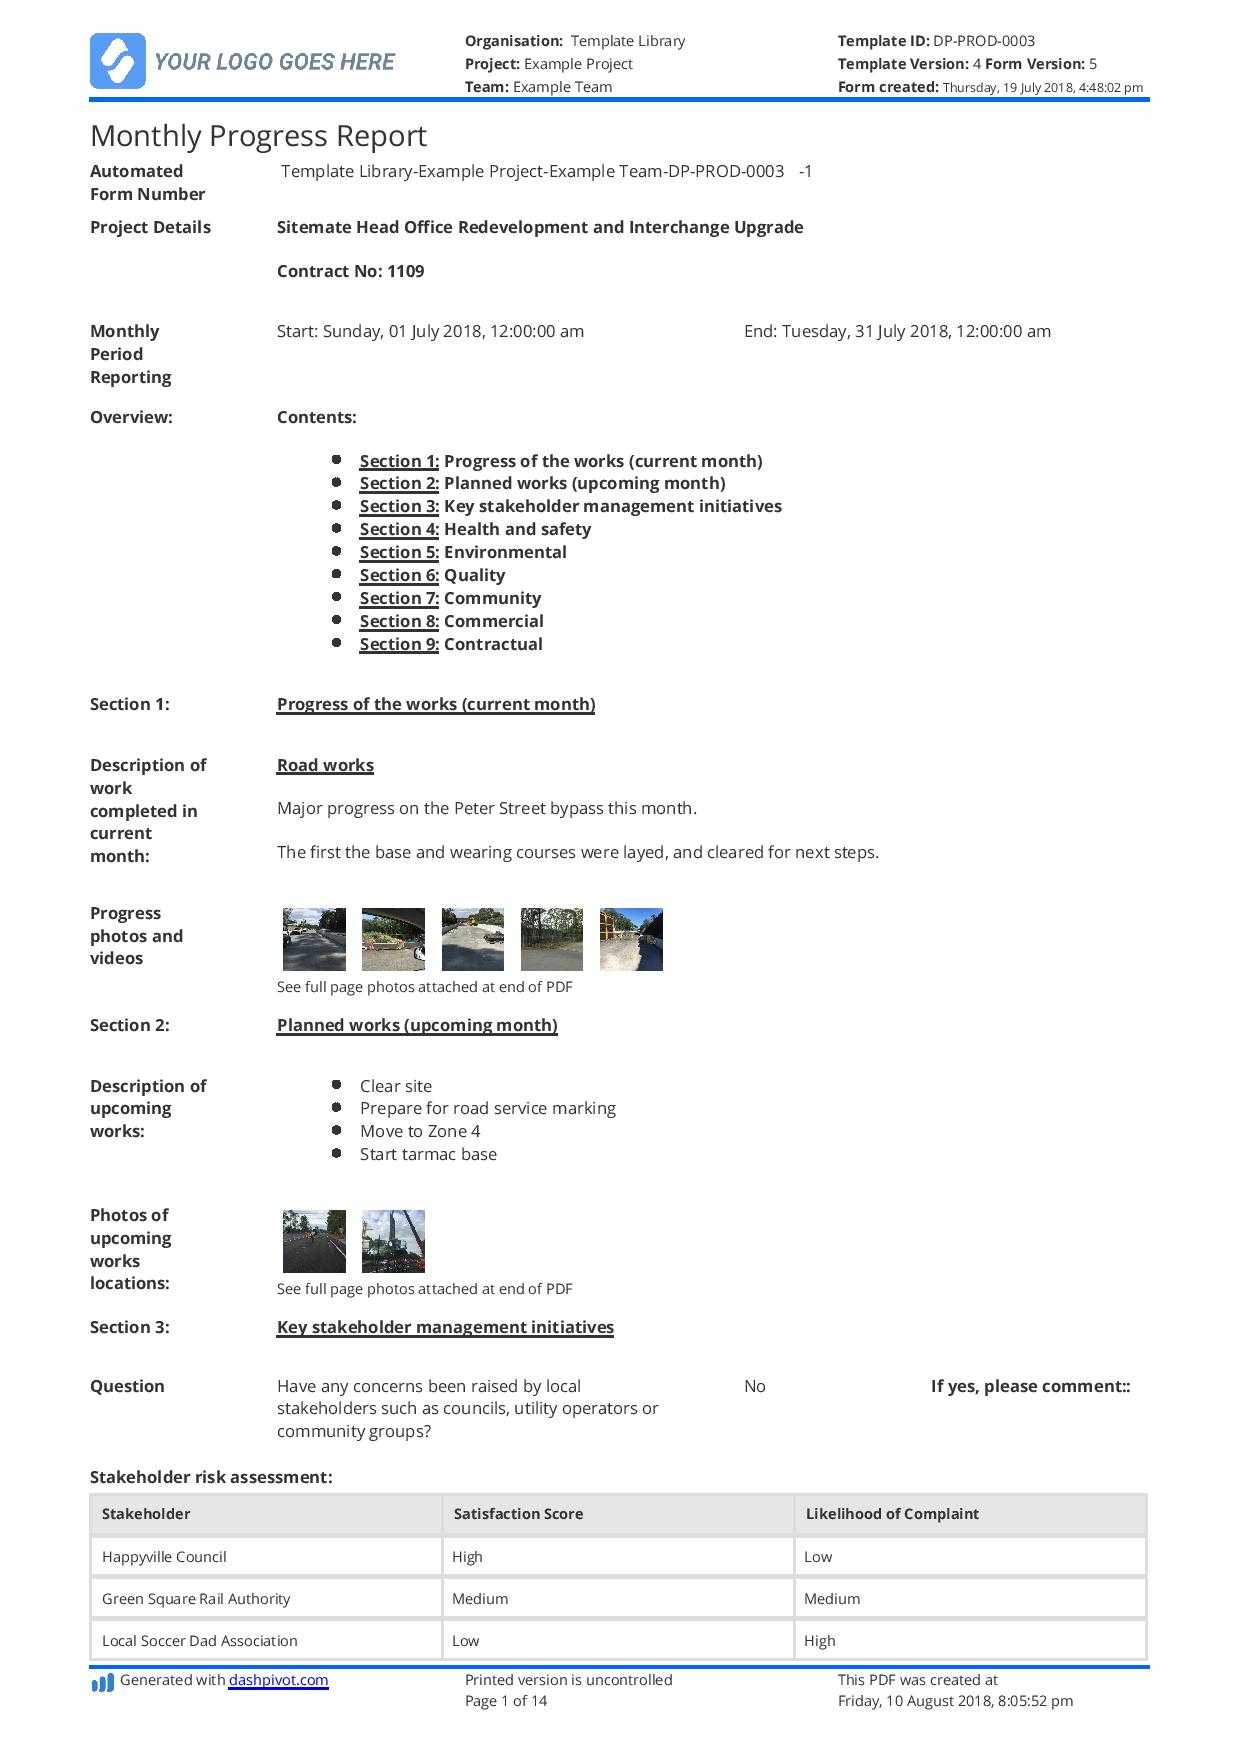 Monthly Construction Progress Report Template: Use This With Site Progress Report Template